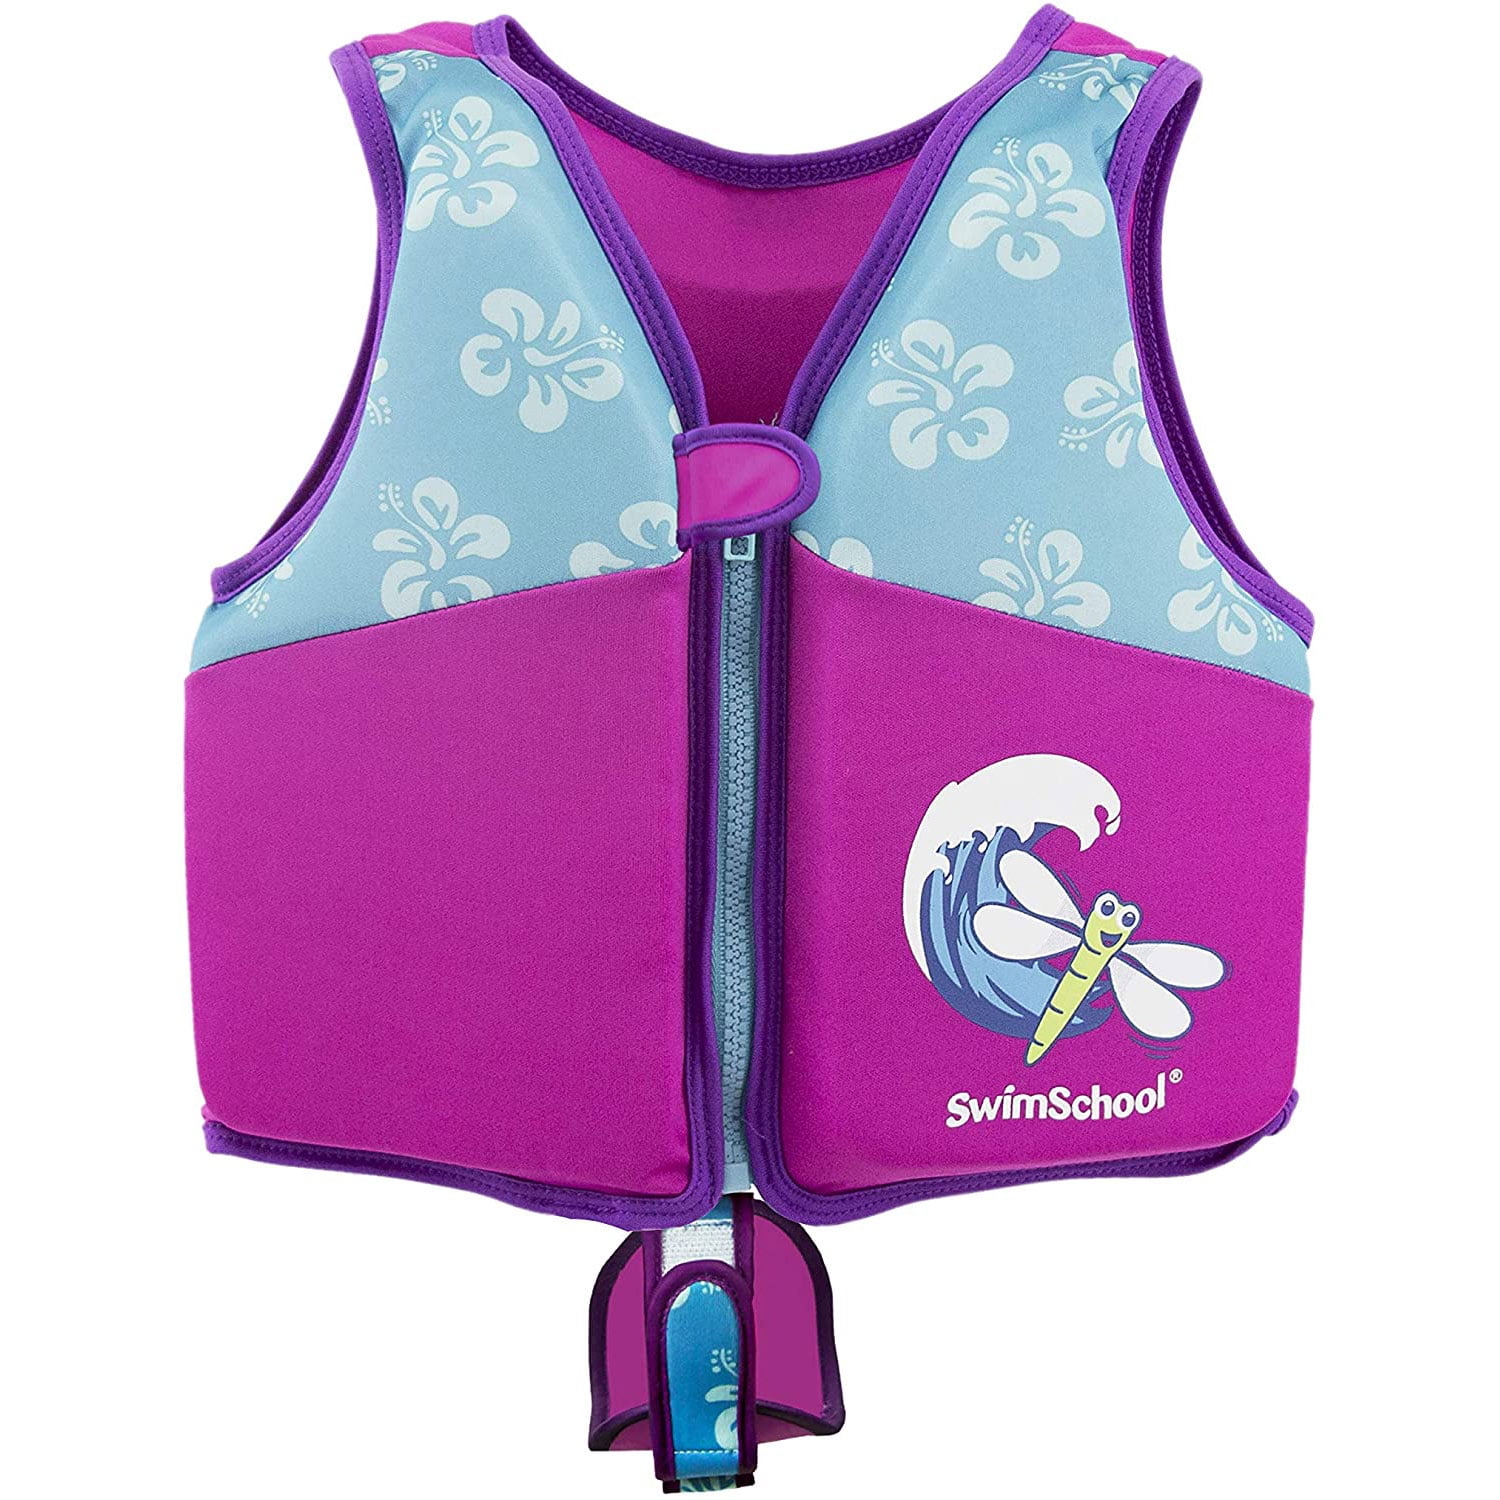 Swimschool Swim Trainer Vest with Sun Protective Sleeves Pink Adjustable Safety Strap Medium/Large up to 50 Lbs. 